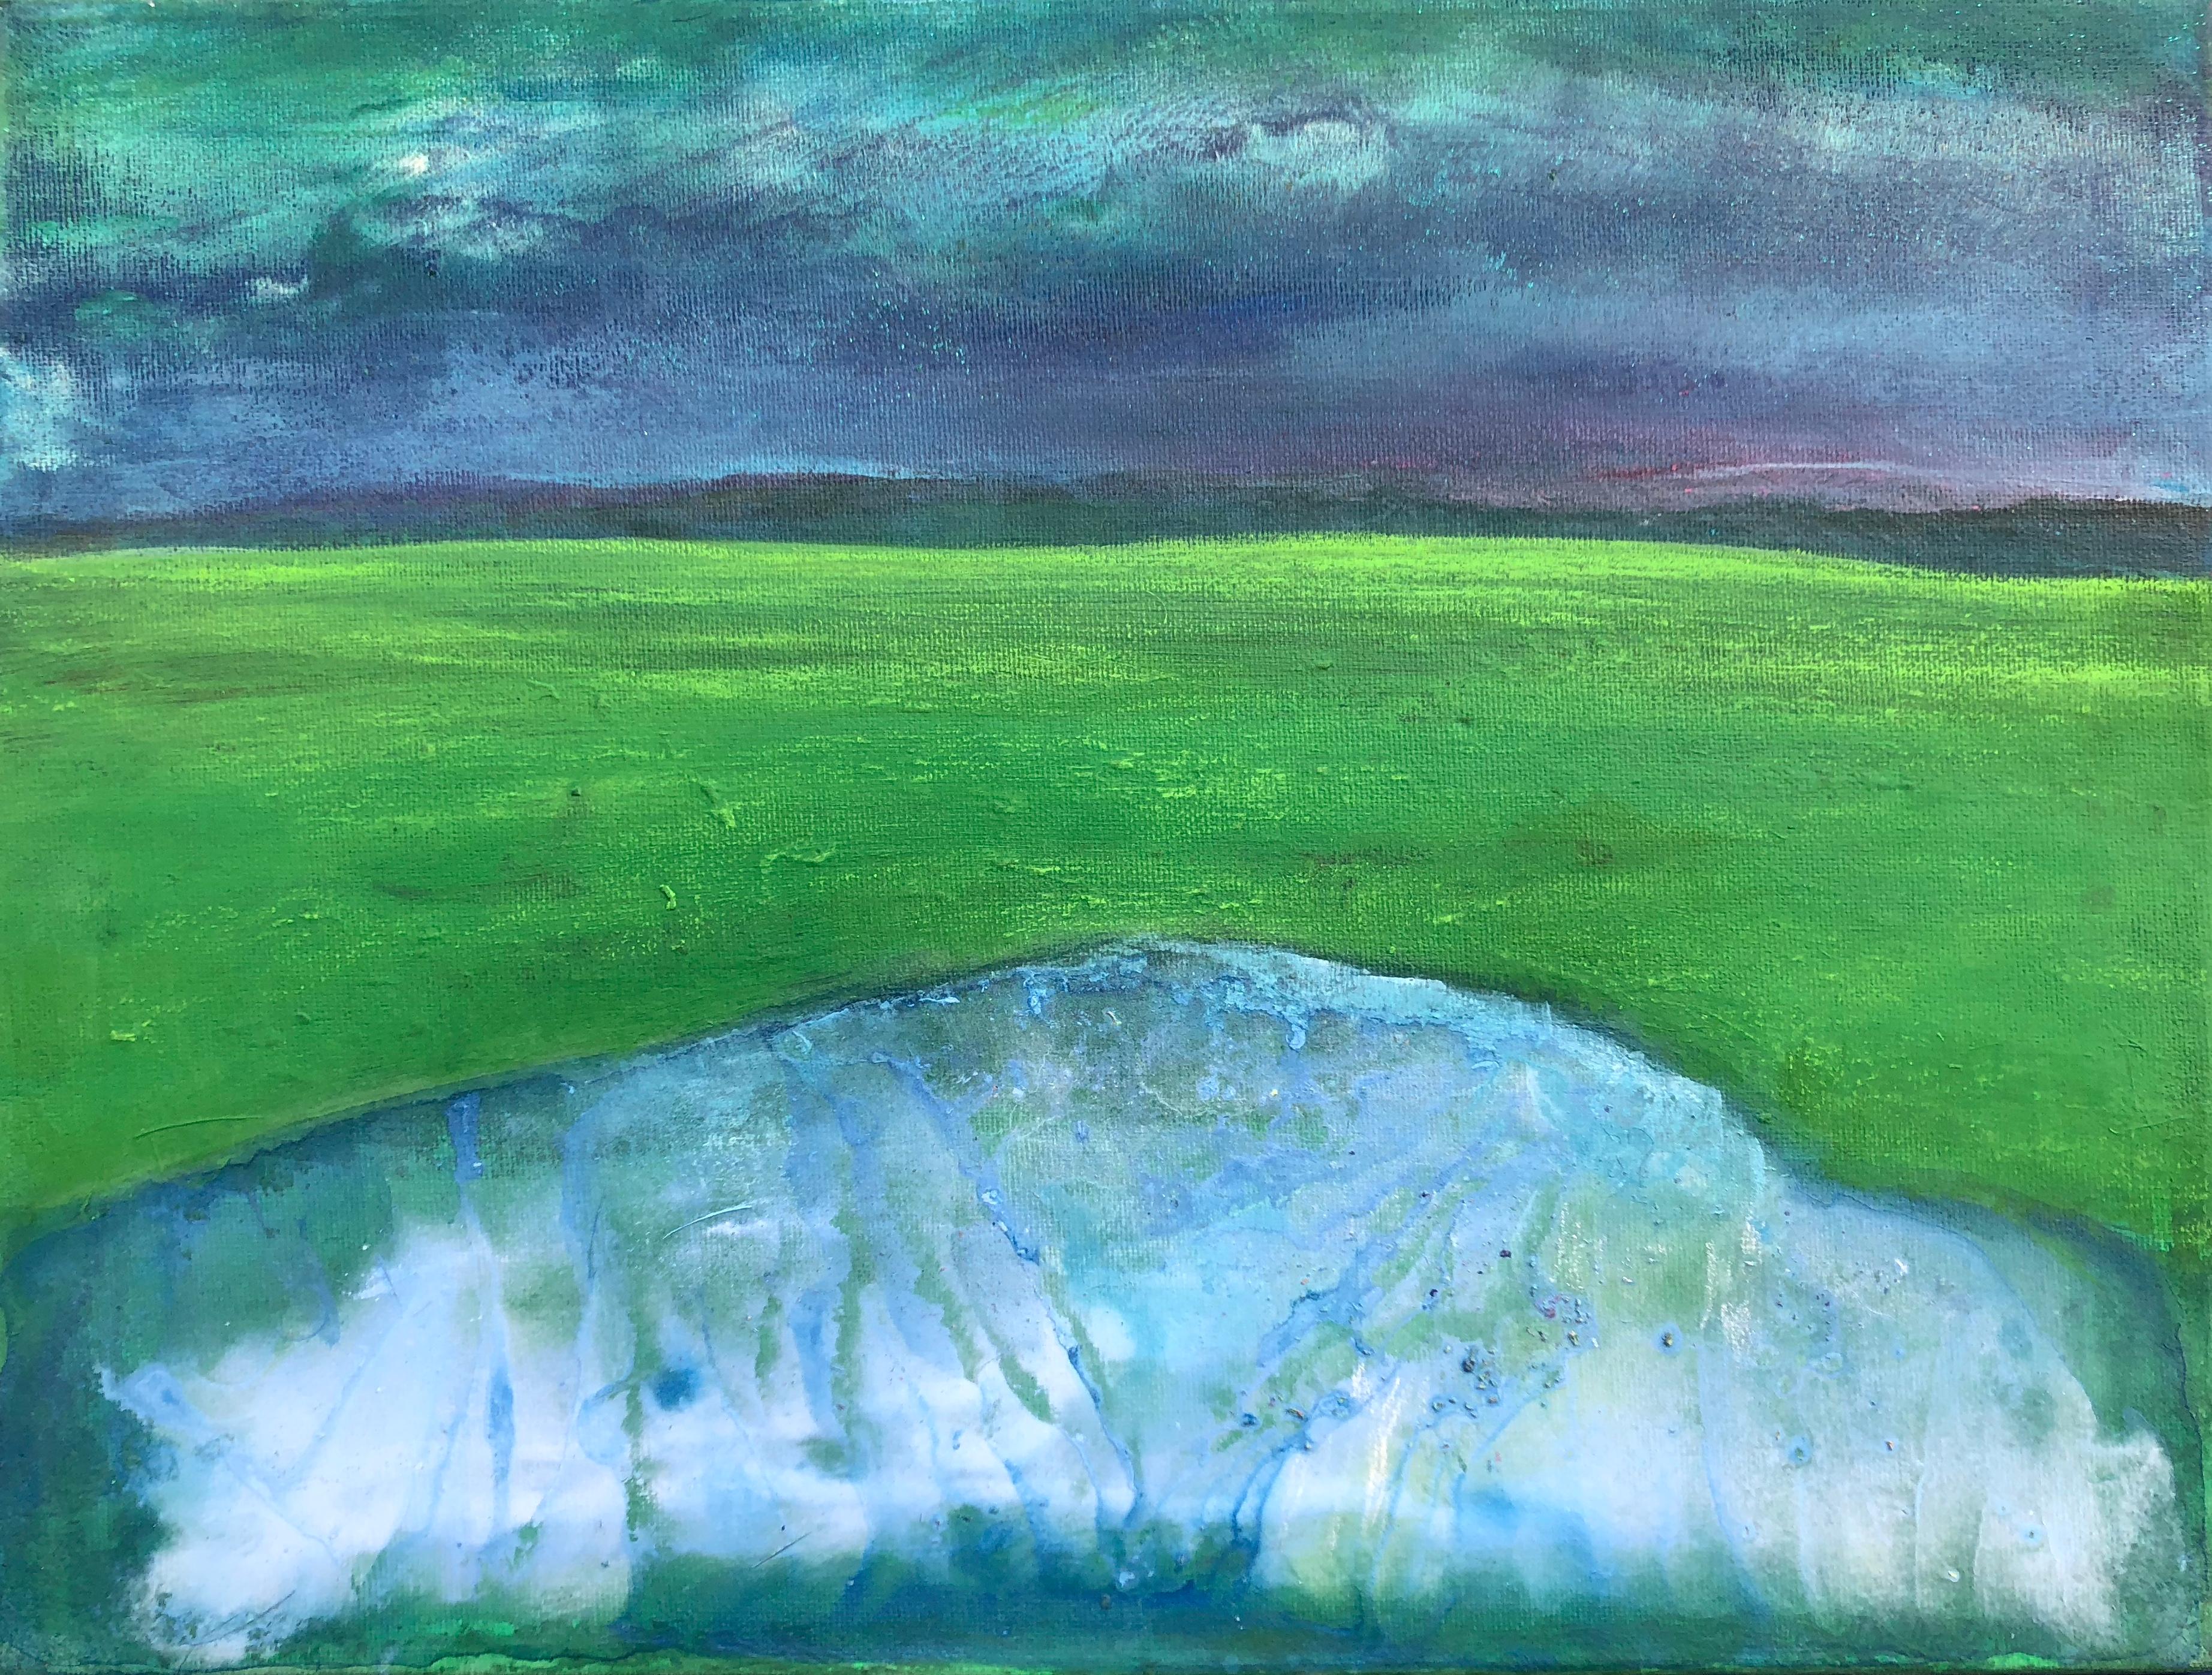 Contemporary abstract landscape painting on canvas, green, white, blue 21st cent - Mixed Media Art by Volodymyr Zayichenko